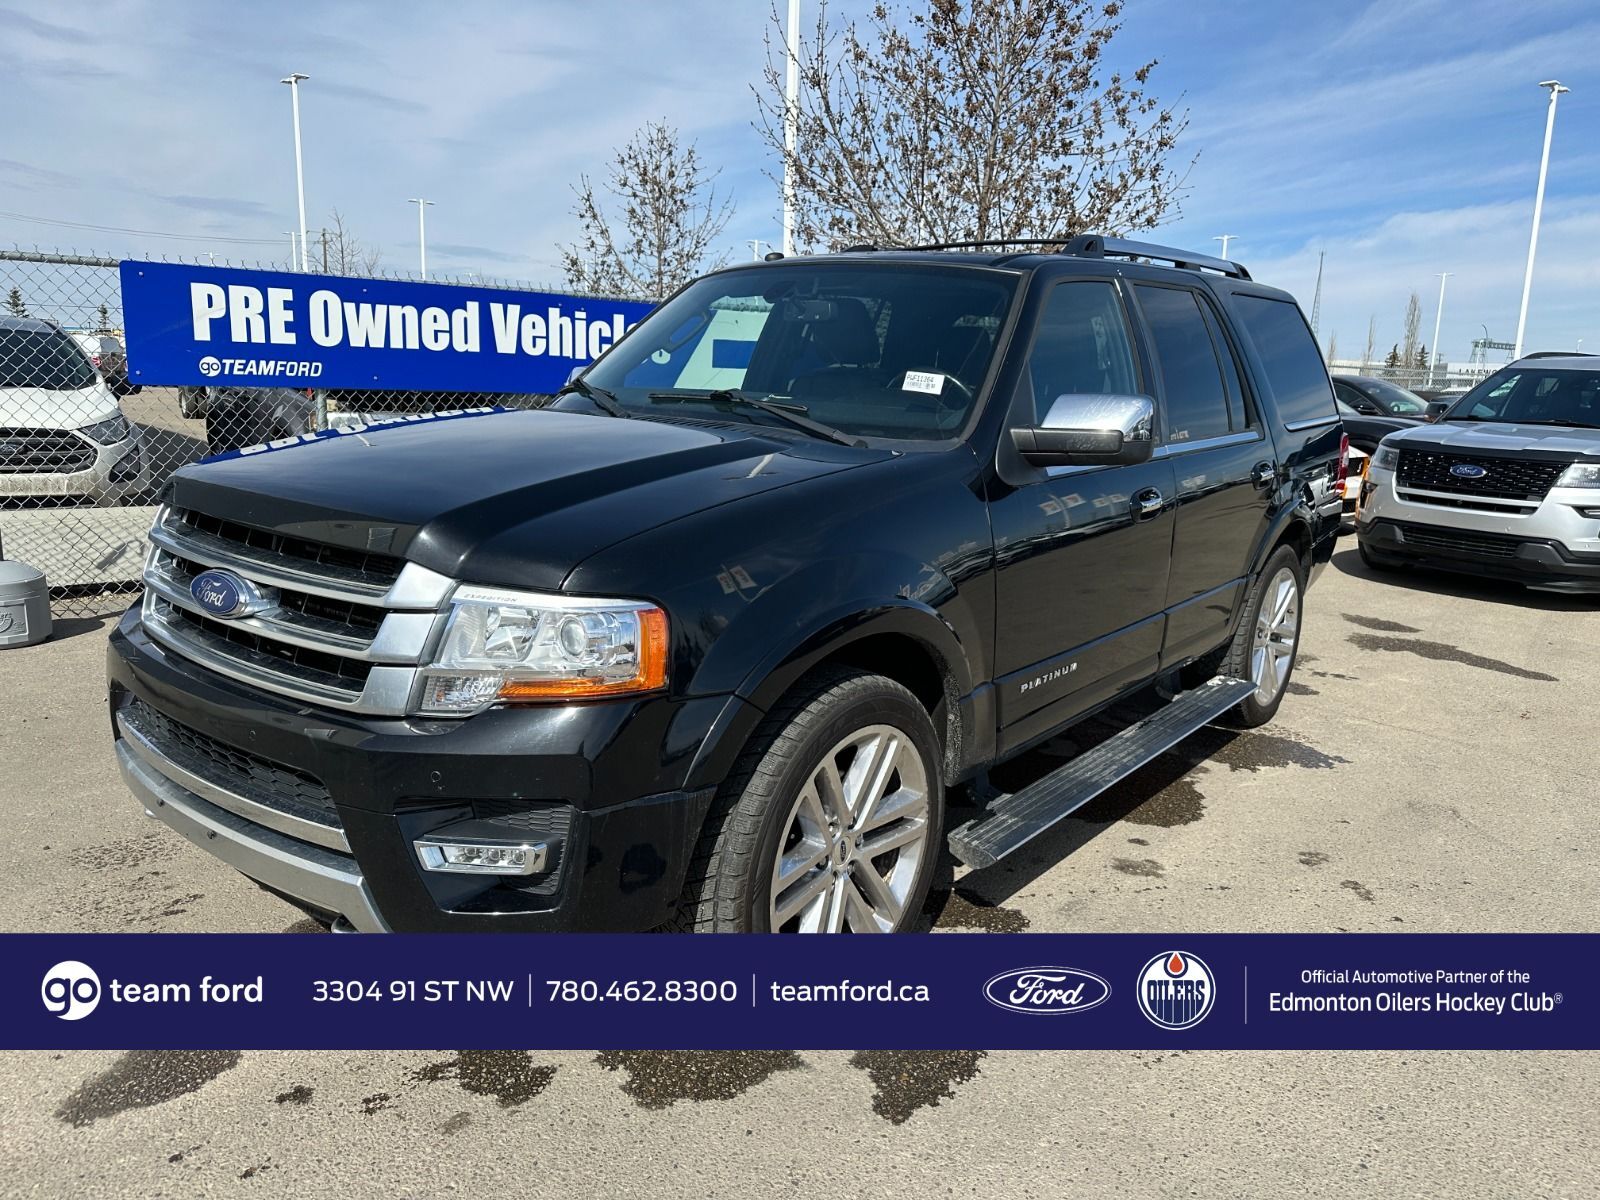 2016 Ford Expedition 3.5L V6 ENG, PLATINUM, TRAILER TOW, REVERSE CAM SY